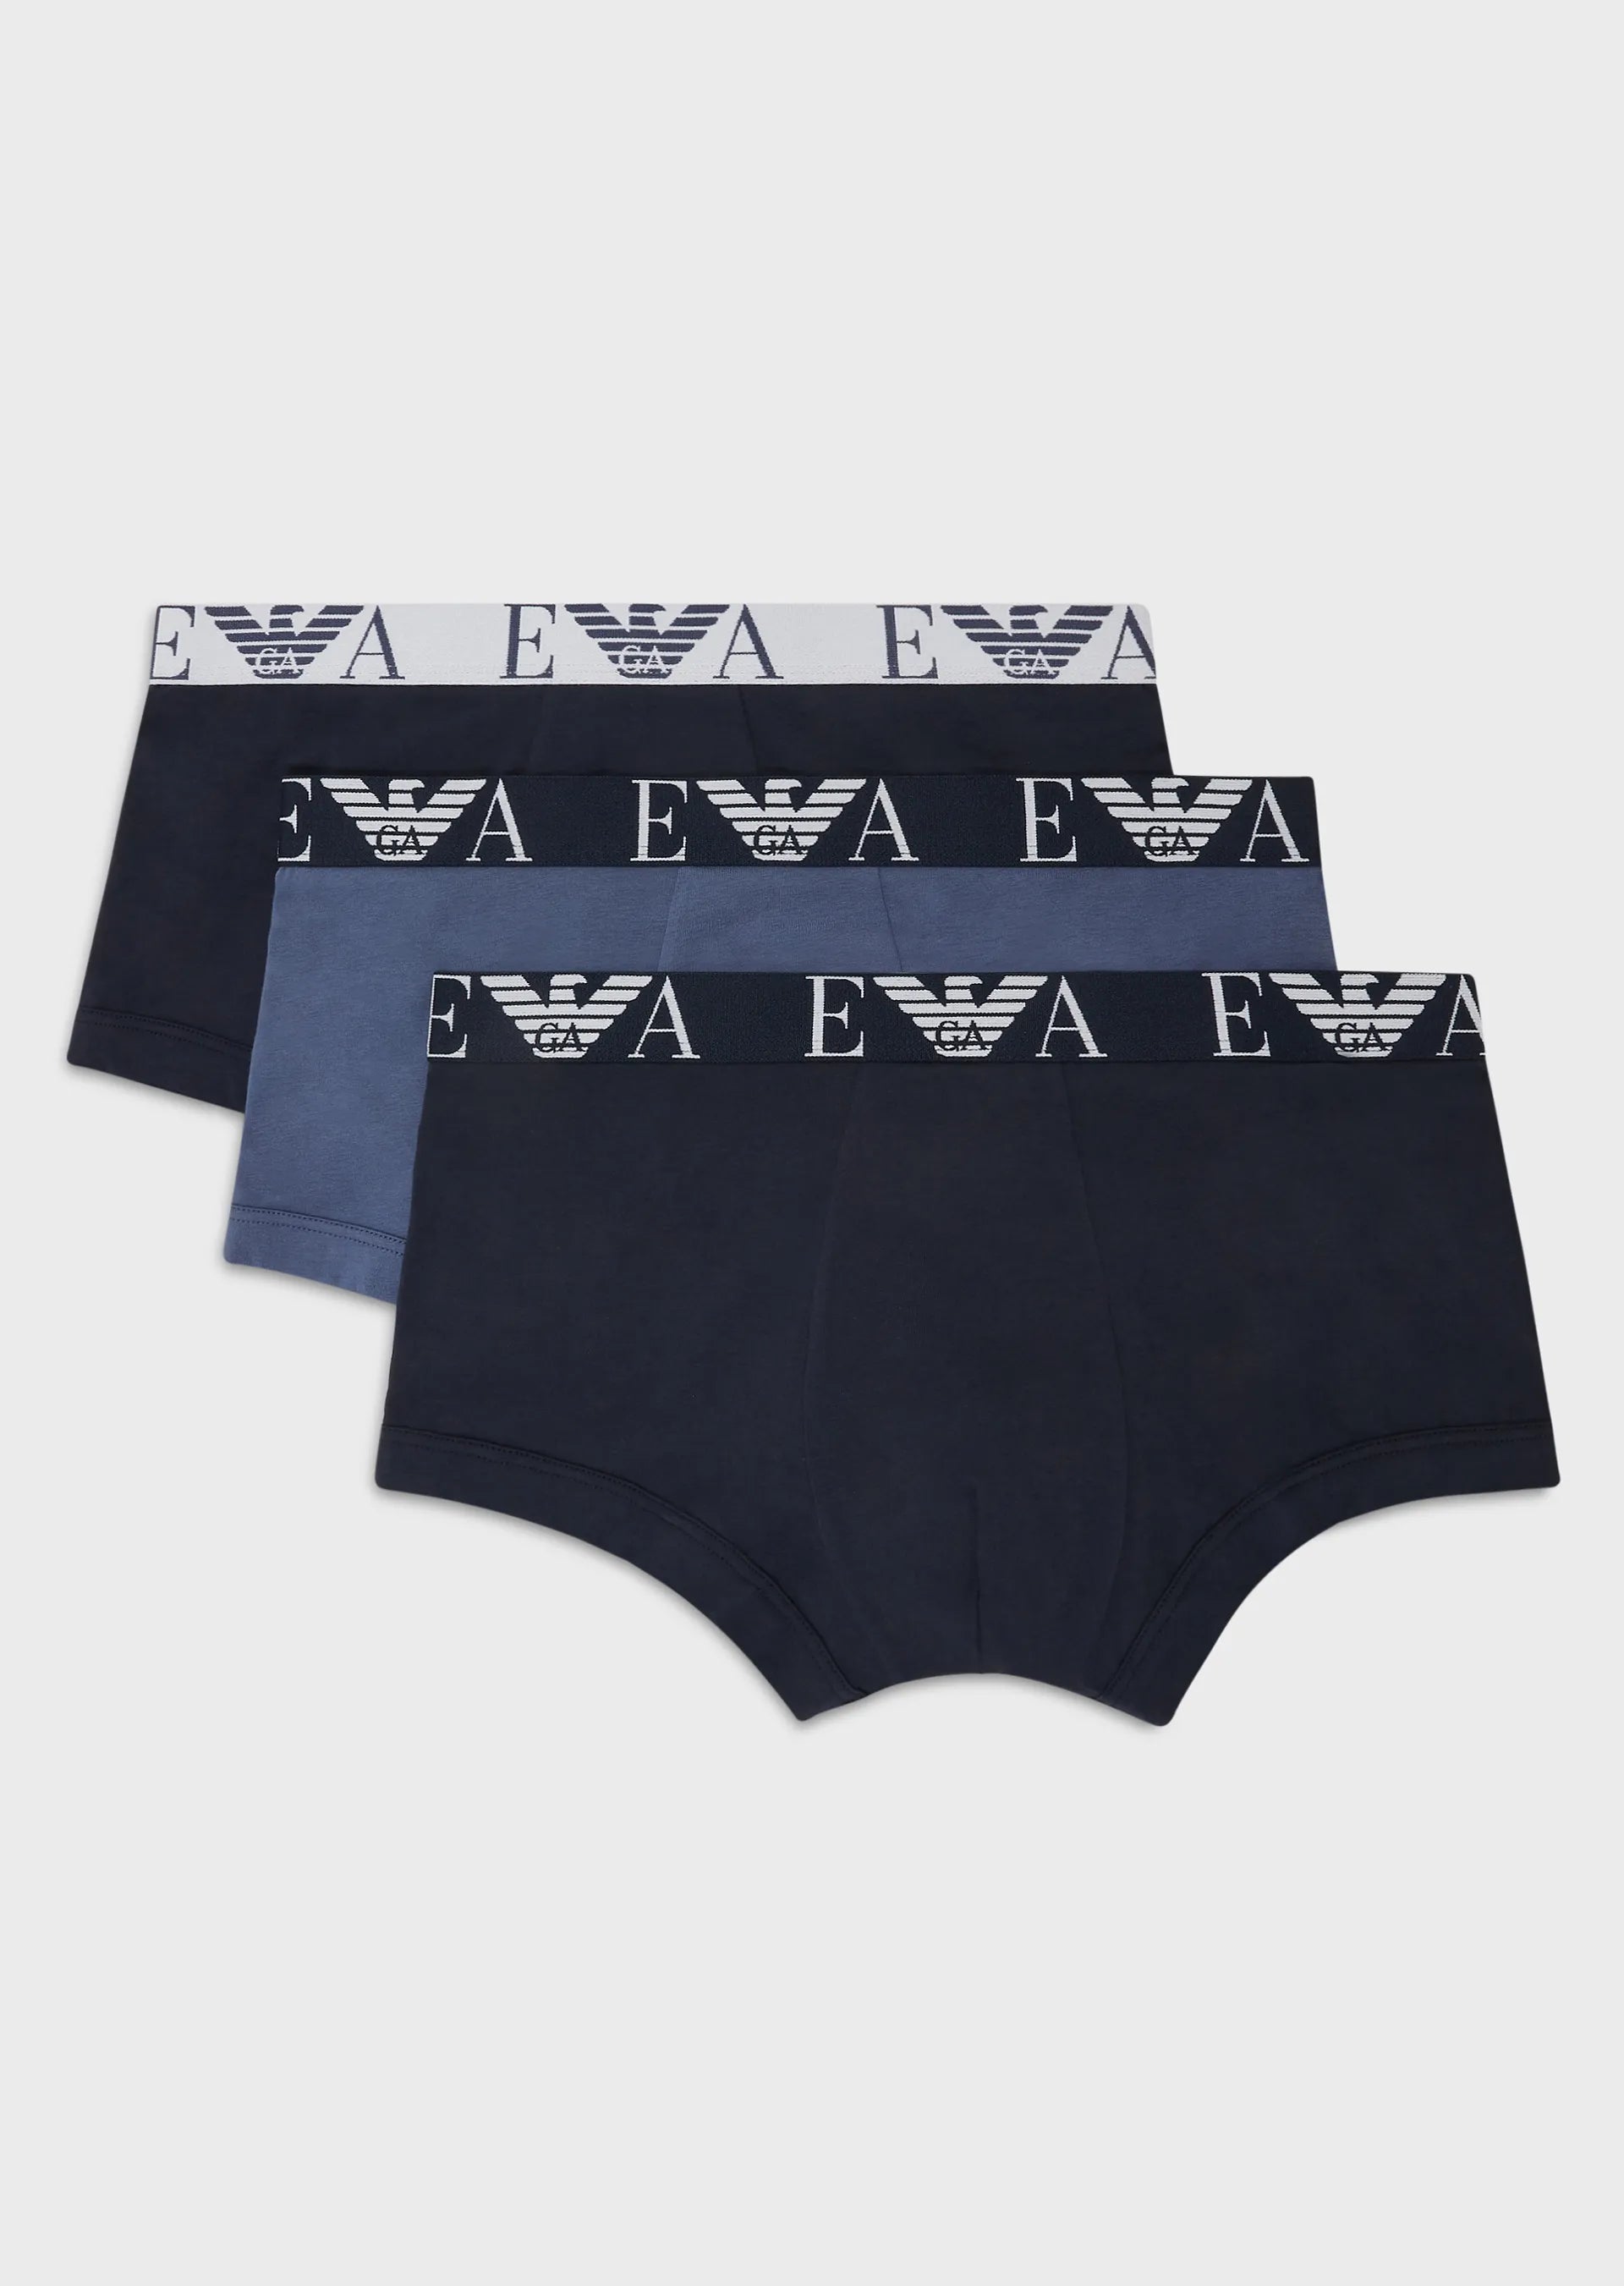 Emporio Armani 3 Pack Trunk - Stretch Cotton with Core Logo - Navy